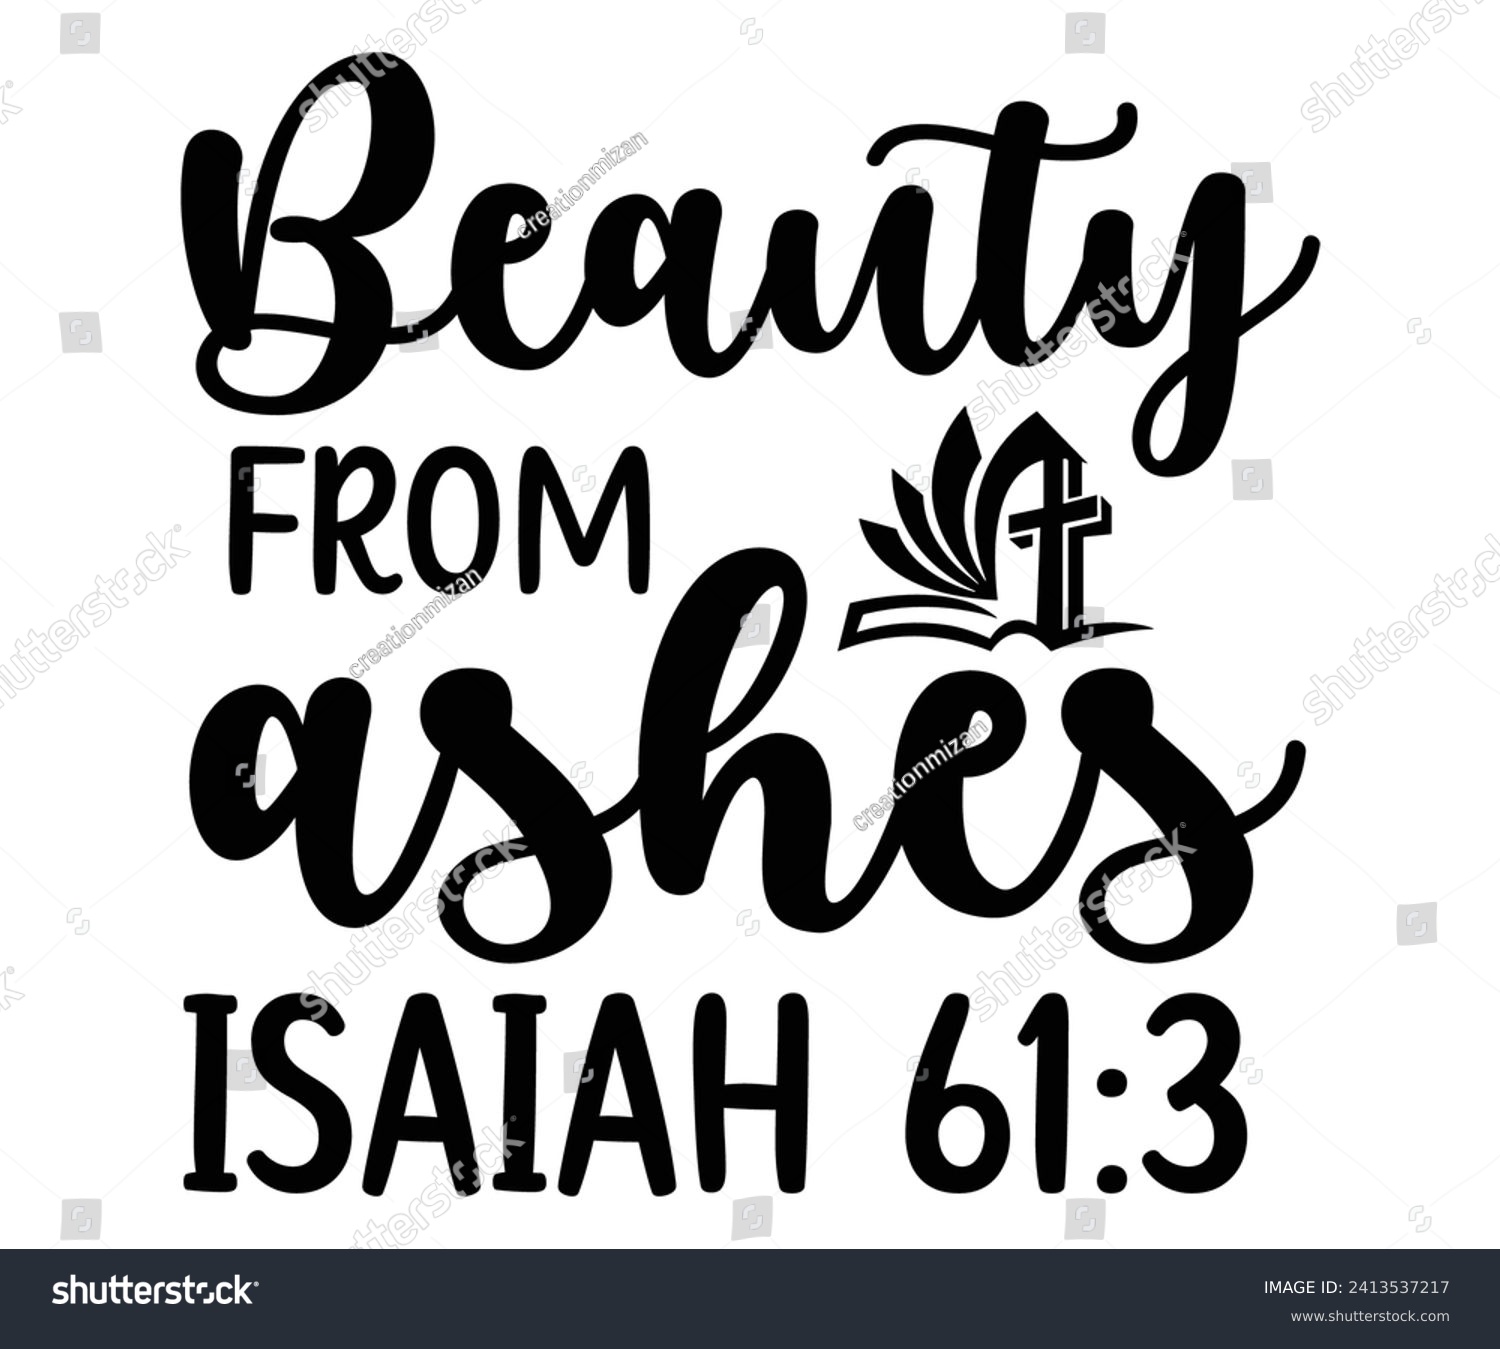 SVG of beauty from ashes isaiah 61:3 Svg,Christian,Love Like Jesus, XOXO, True Story,Religious Easter,Mirrored,Faith Svg,God, Blessed  svg